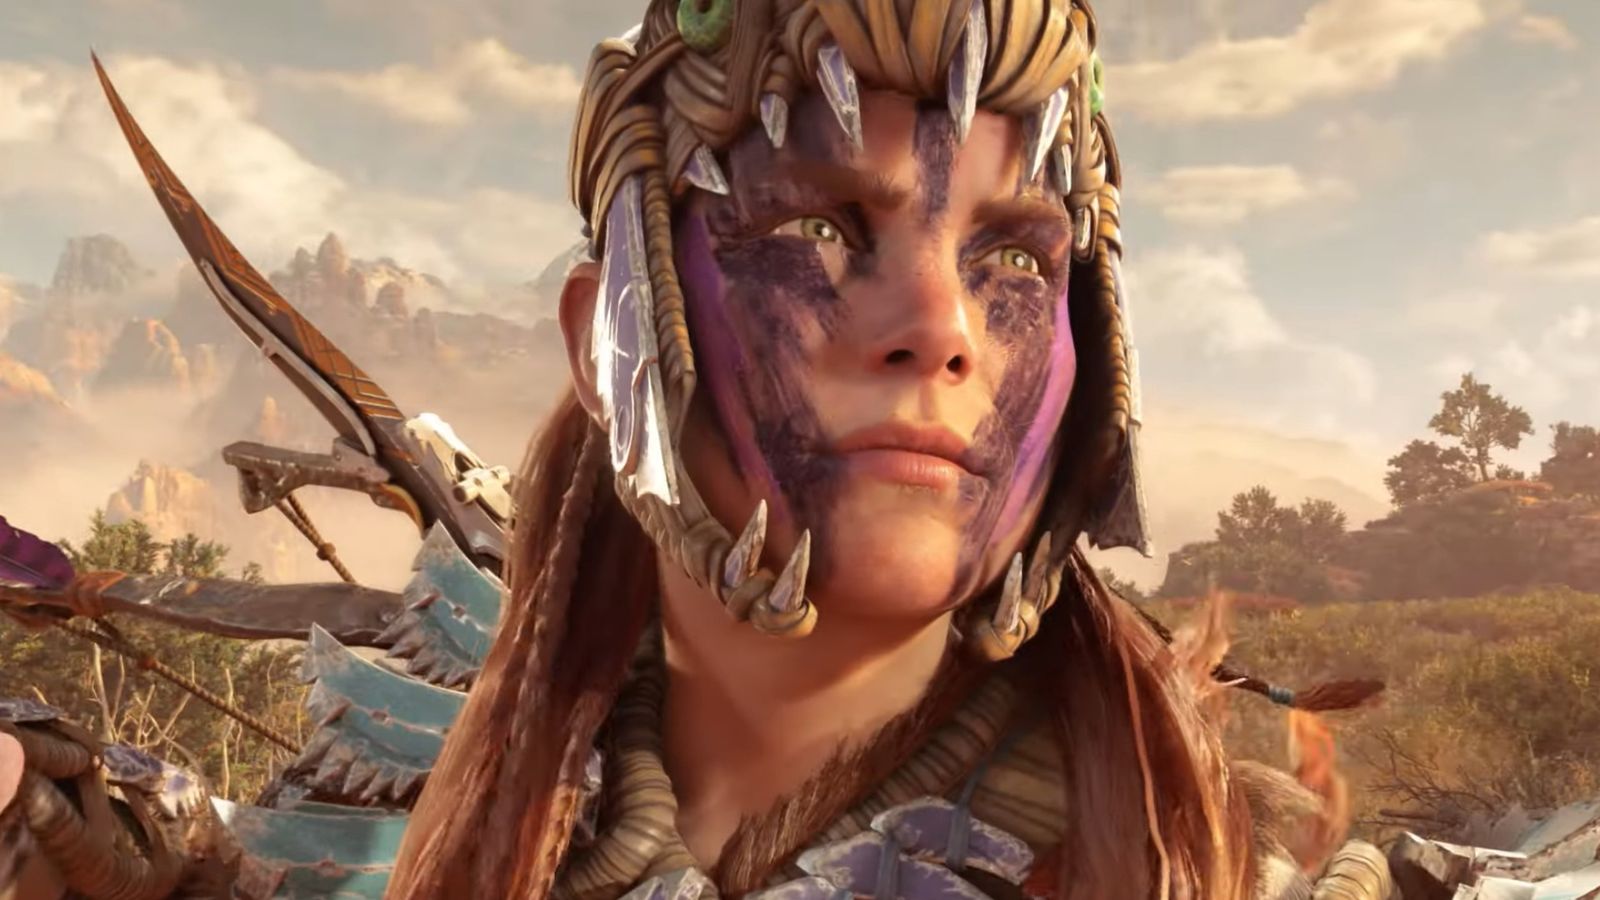 Horizon Forbidden West Aloy in a new outfit and face paint